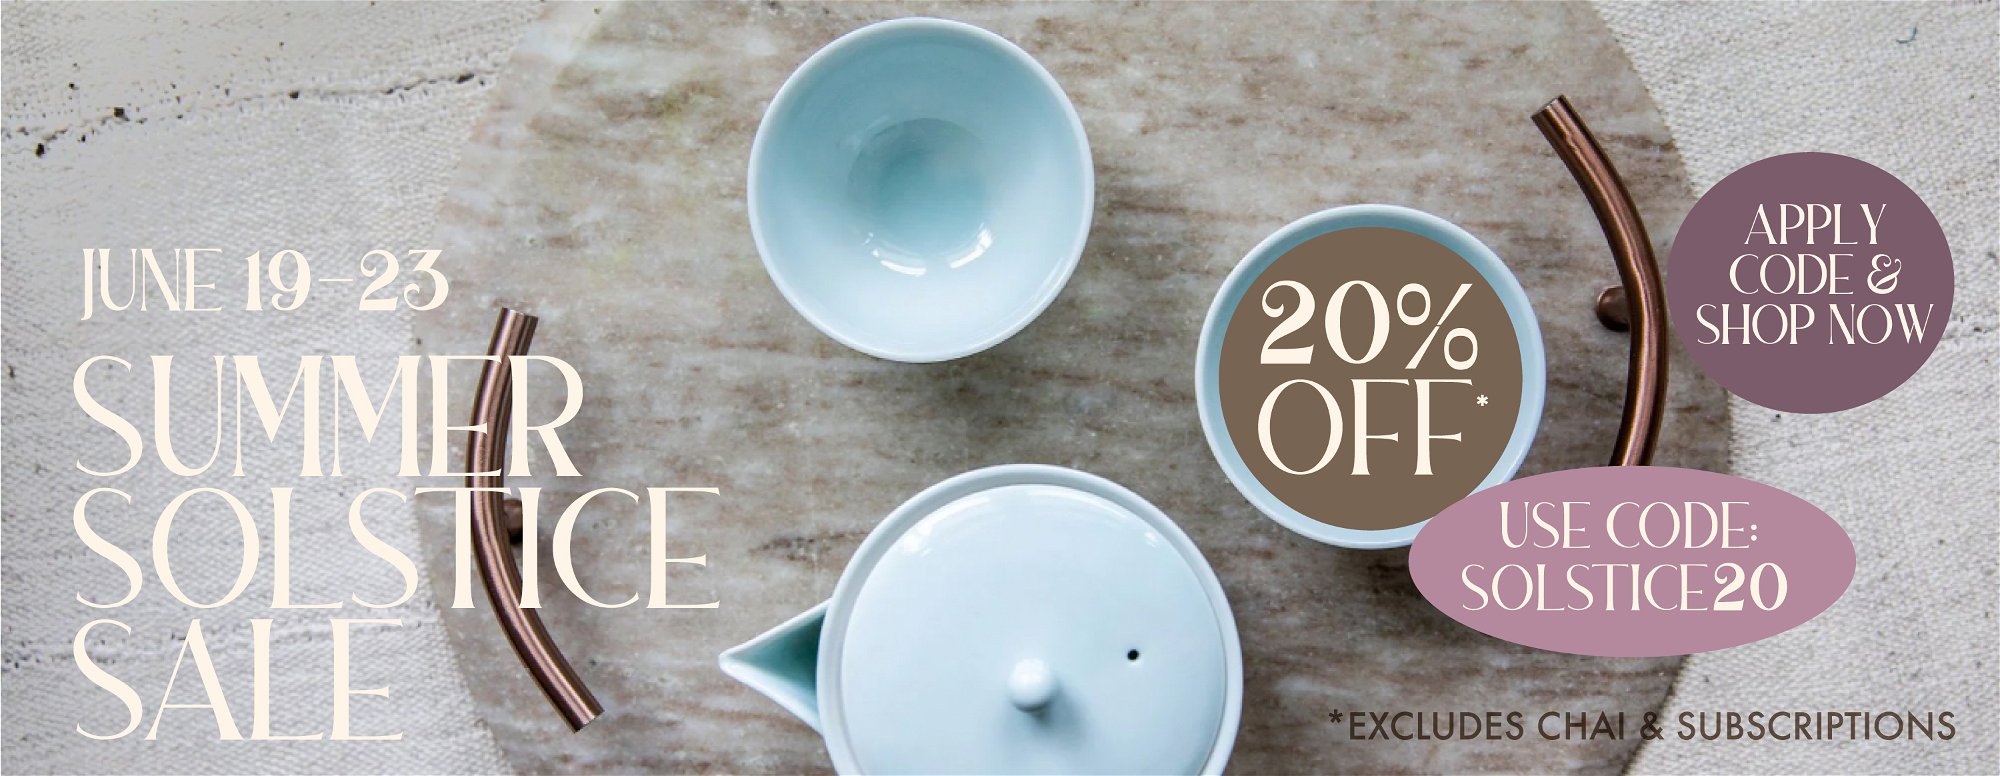 June 19-23 Summer Solstice Sale. 20% off use code SOLSTICE20. Excludes chai and subscriptions